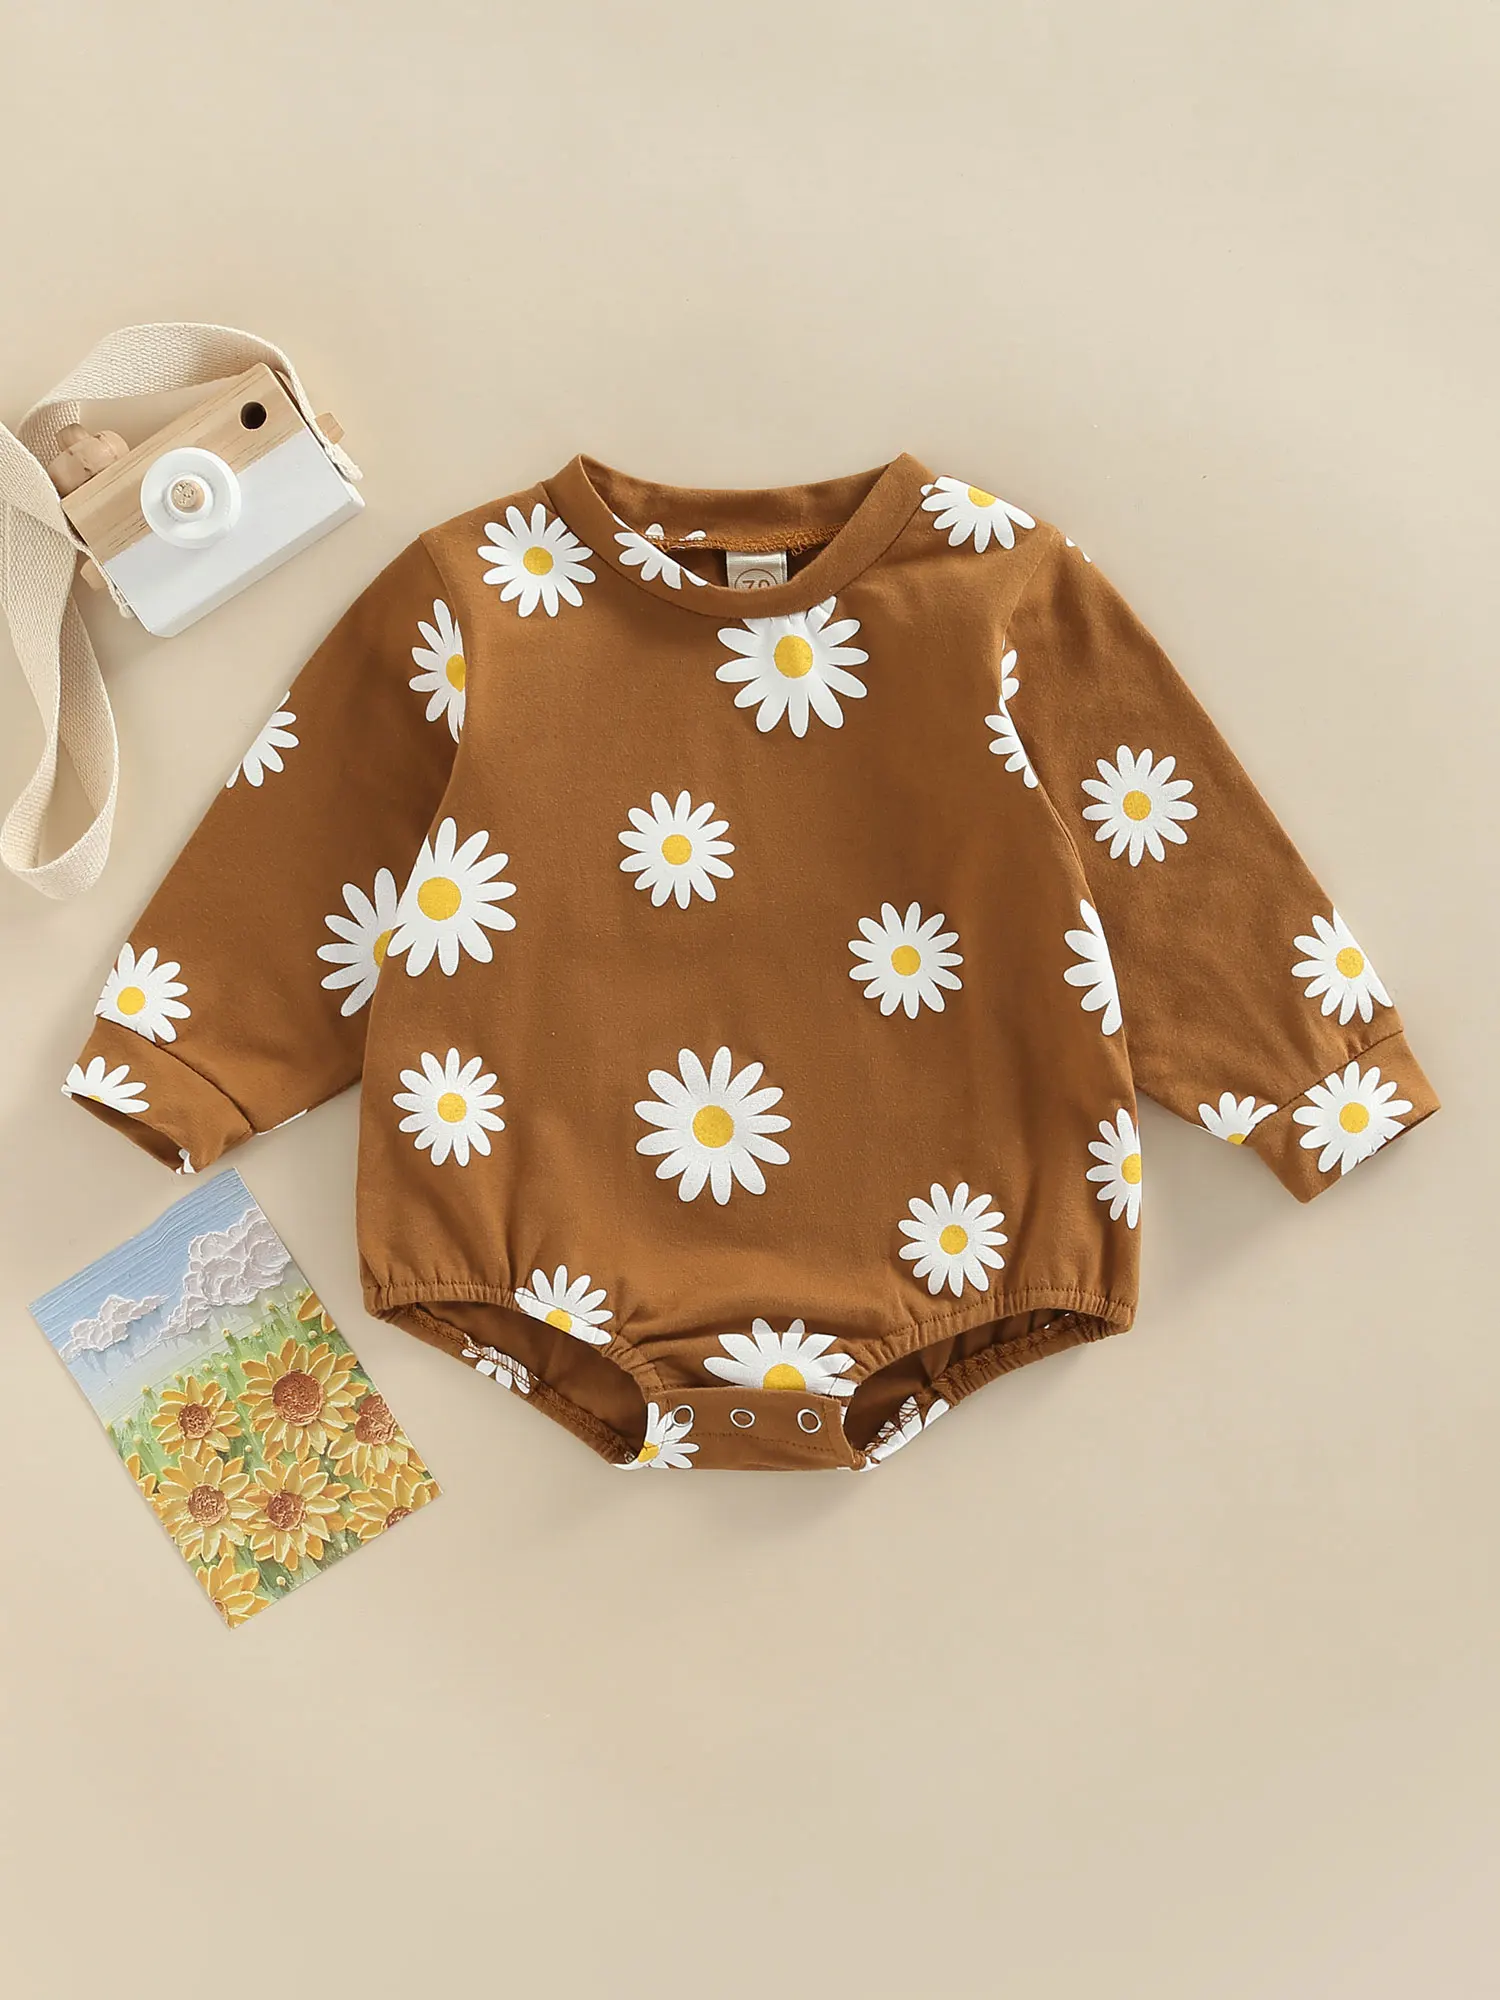 

Baby Girl s Daisy Print Long Sleeve Romper - Loose Casual Style Crew Neck Infant Clothing for a Cute and Comfy Look